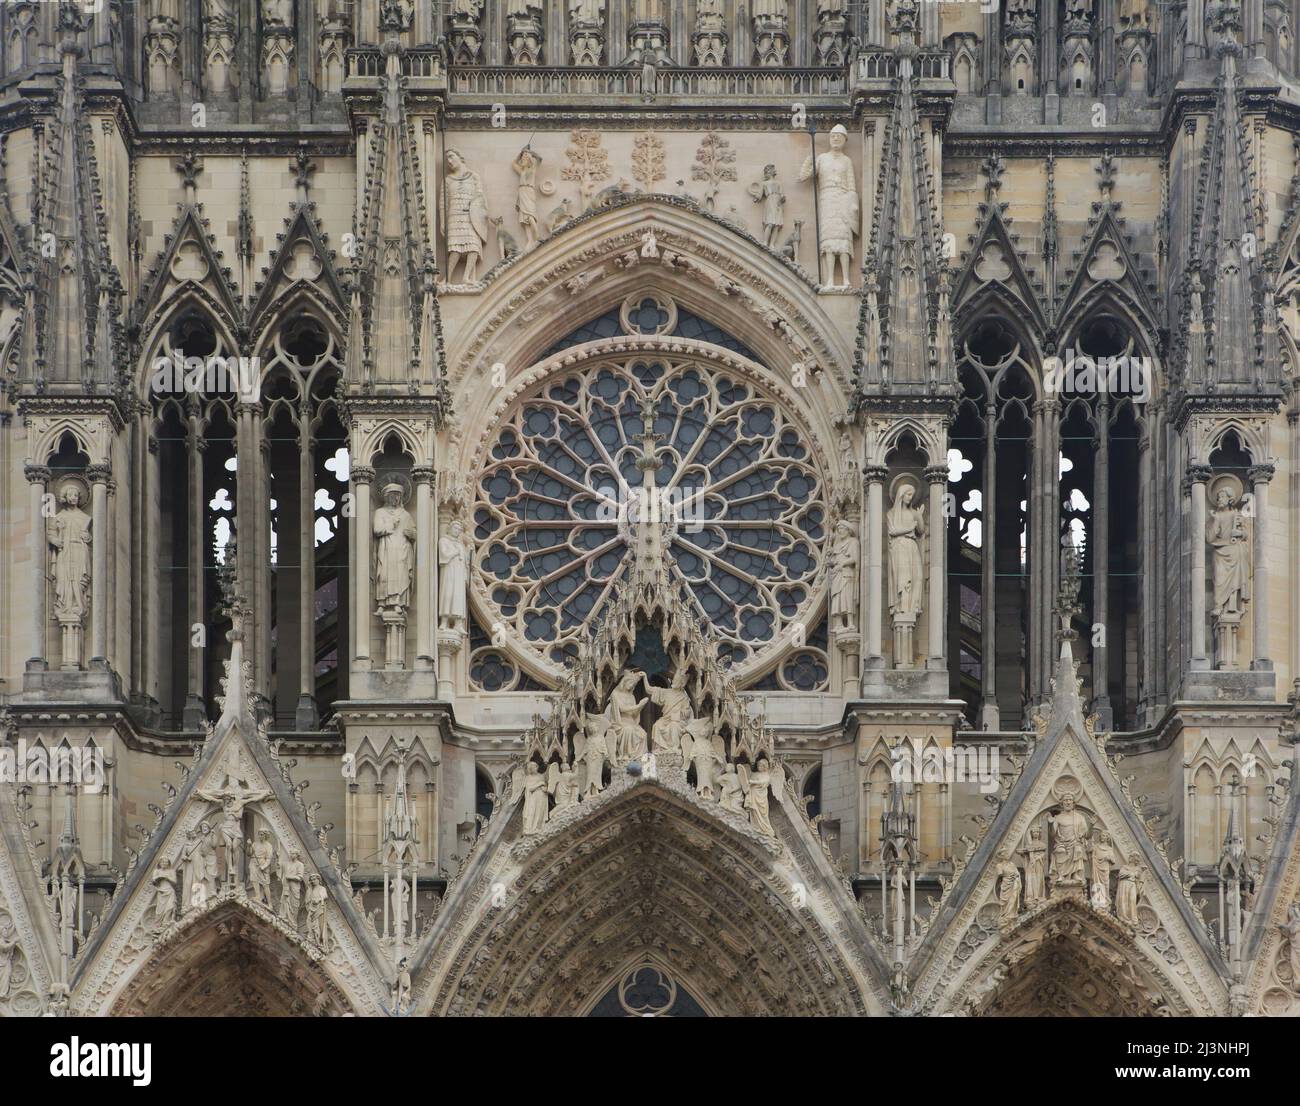 Gothic rose window on the west facade of the Reims Cathedral (Cathédrale Notre-Dame de Reims) in Reims, France. Stock Photo